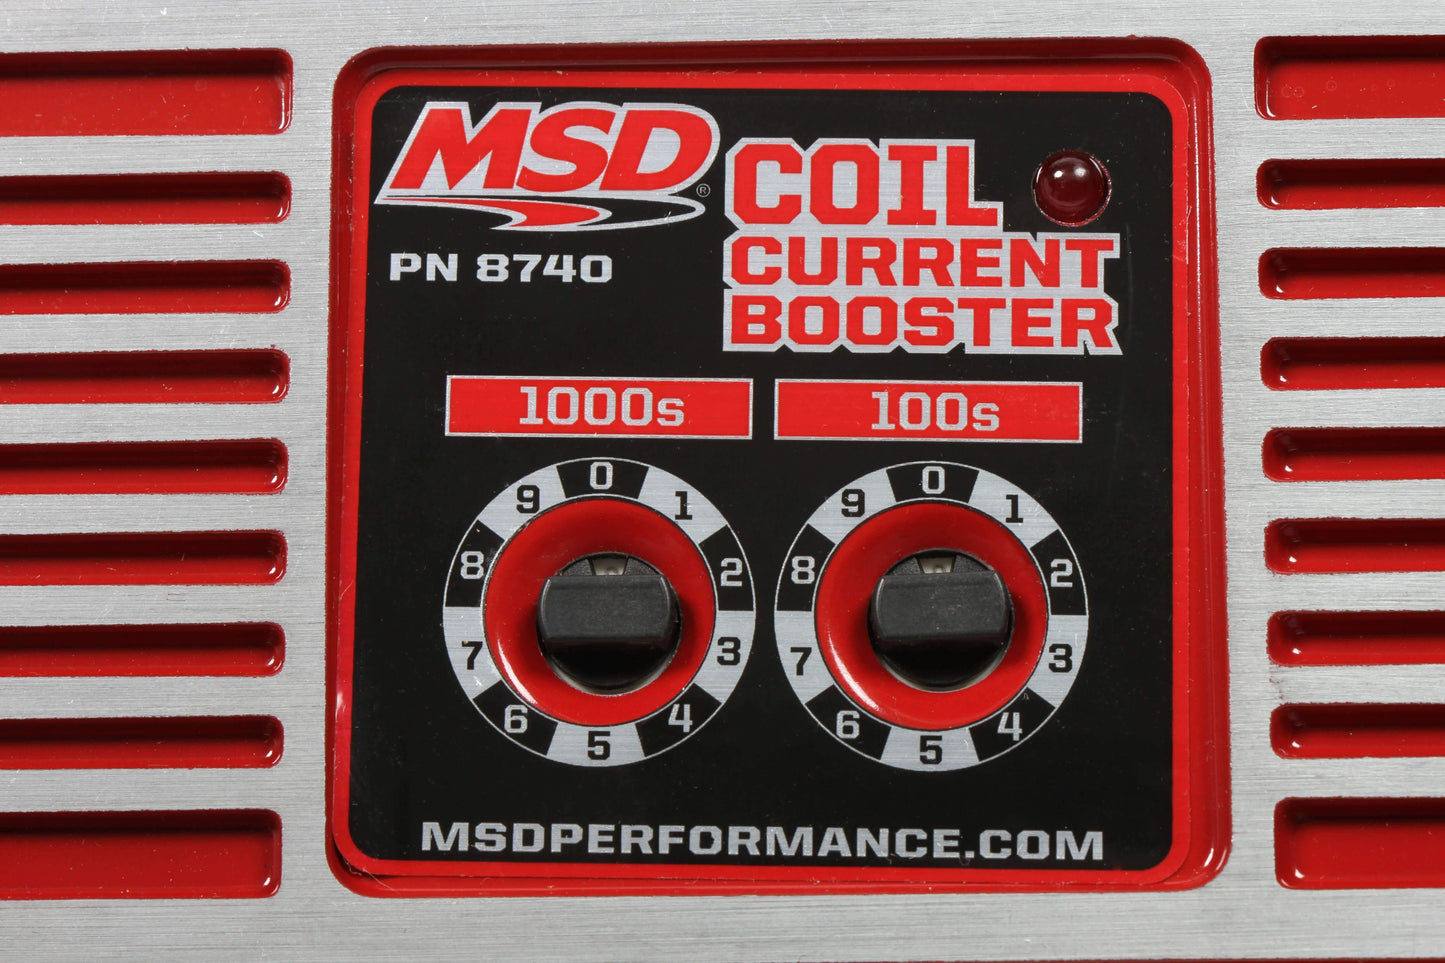 Coil Current Booster for Ford C-O-P - 8740 - Modern Day Muffler